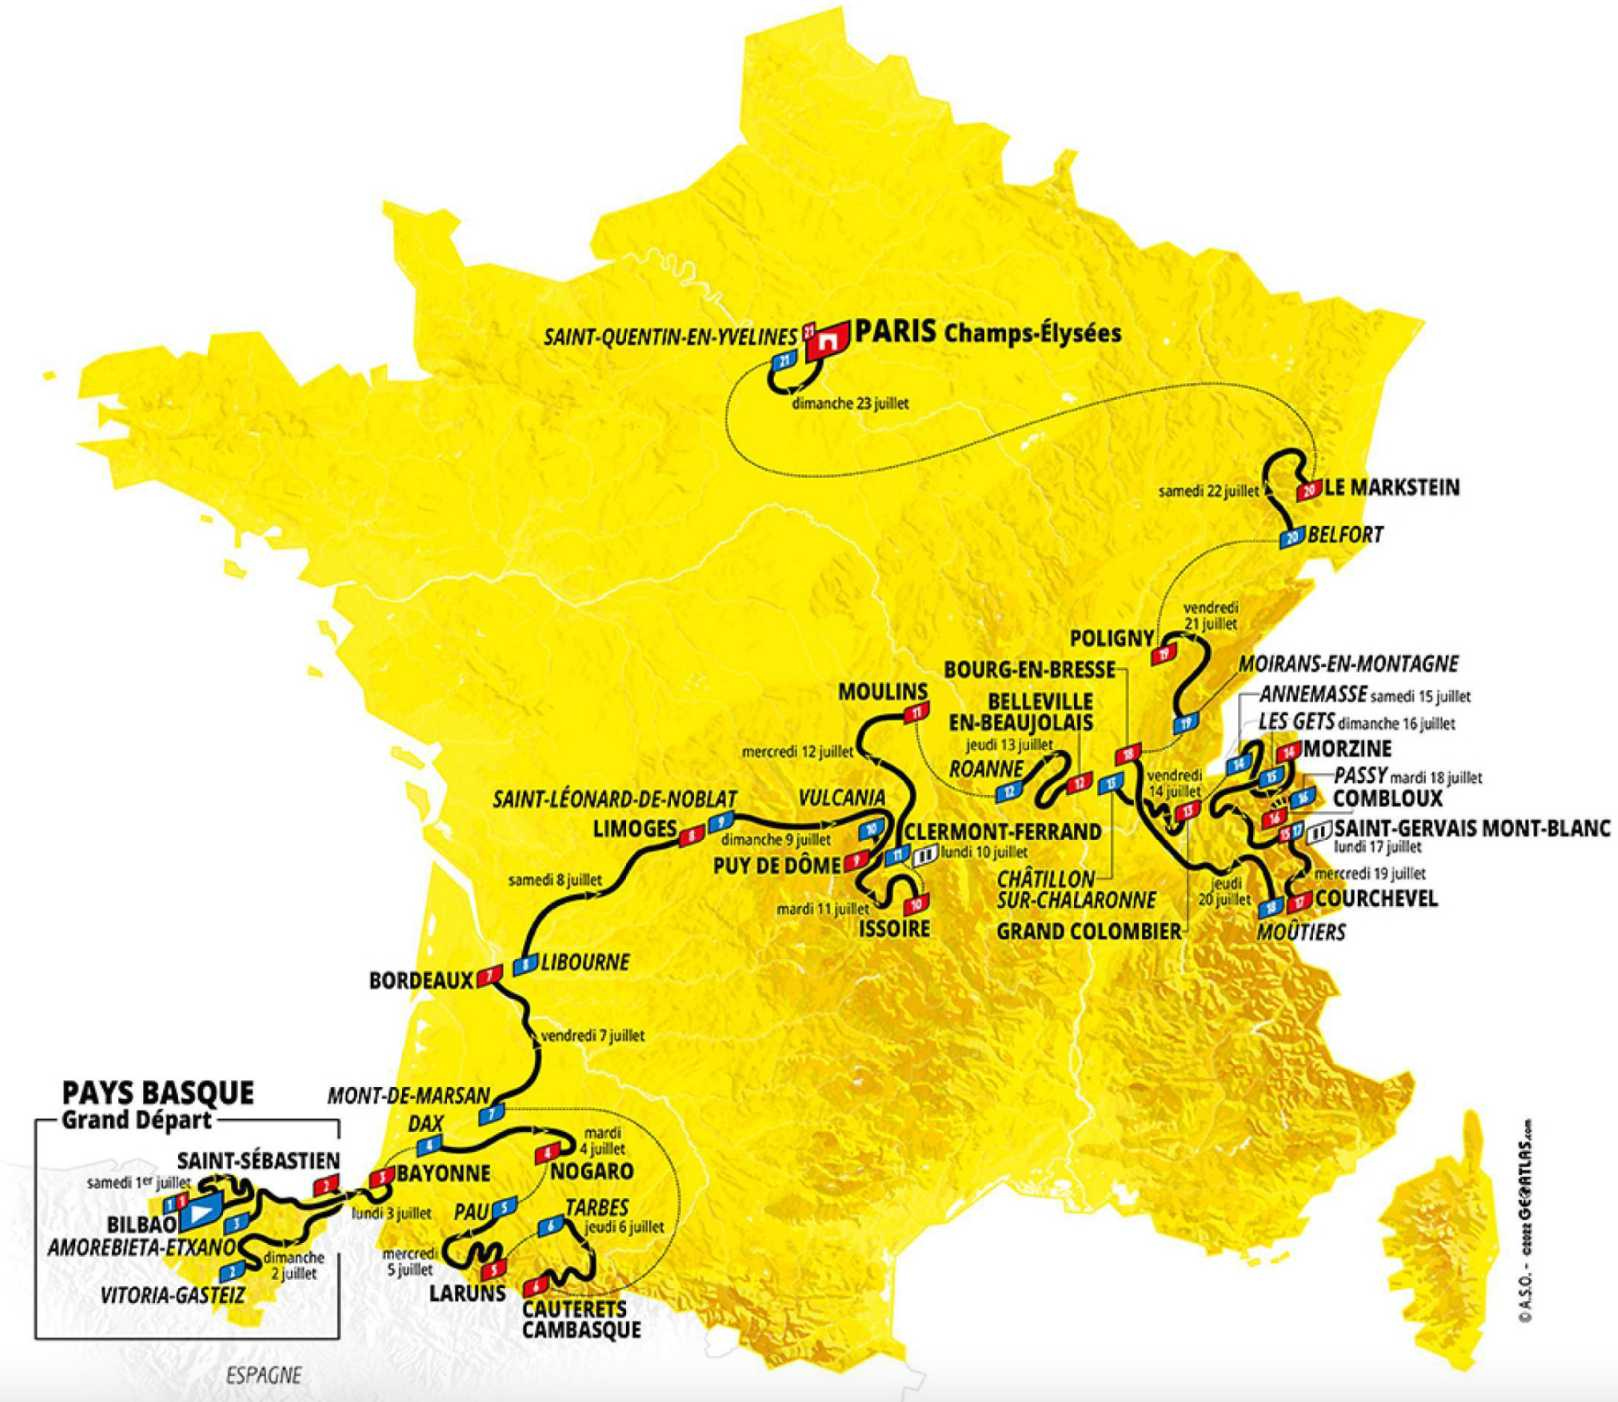 Three Initial Reactions From the 2023 Tour de France Route Reveal